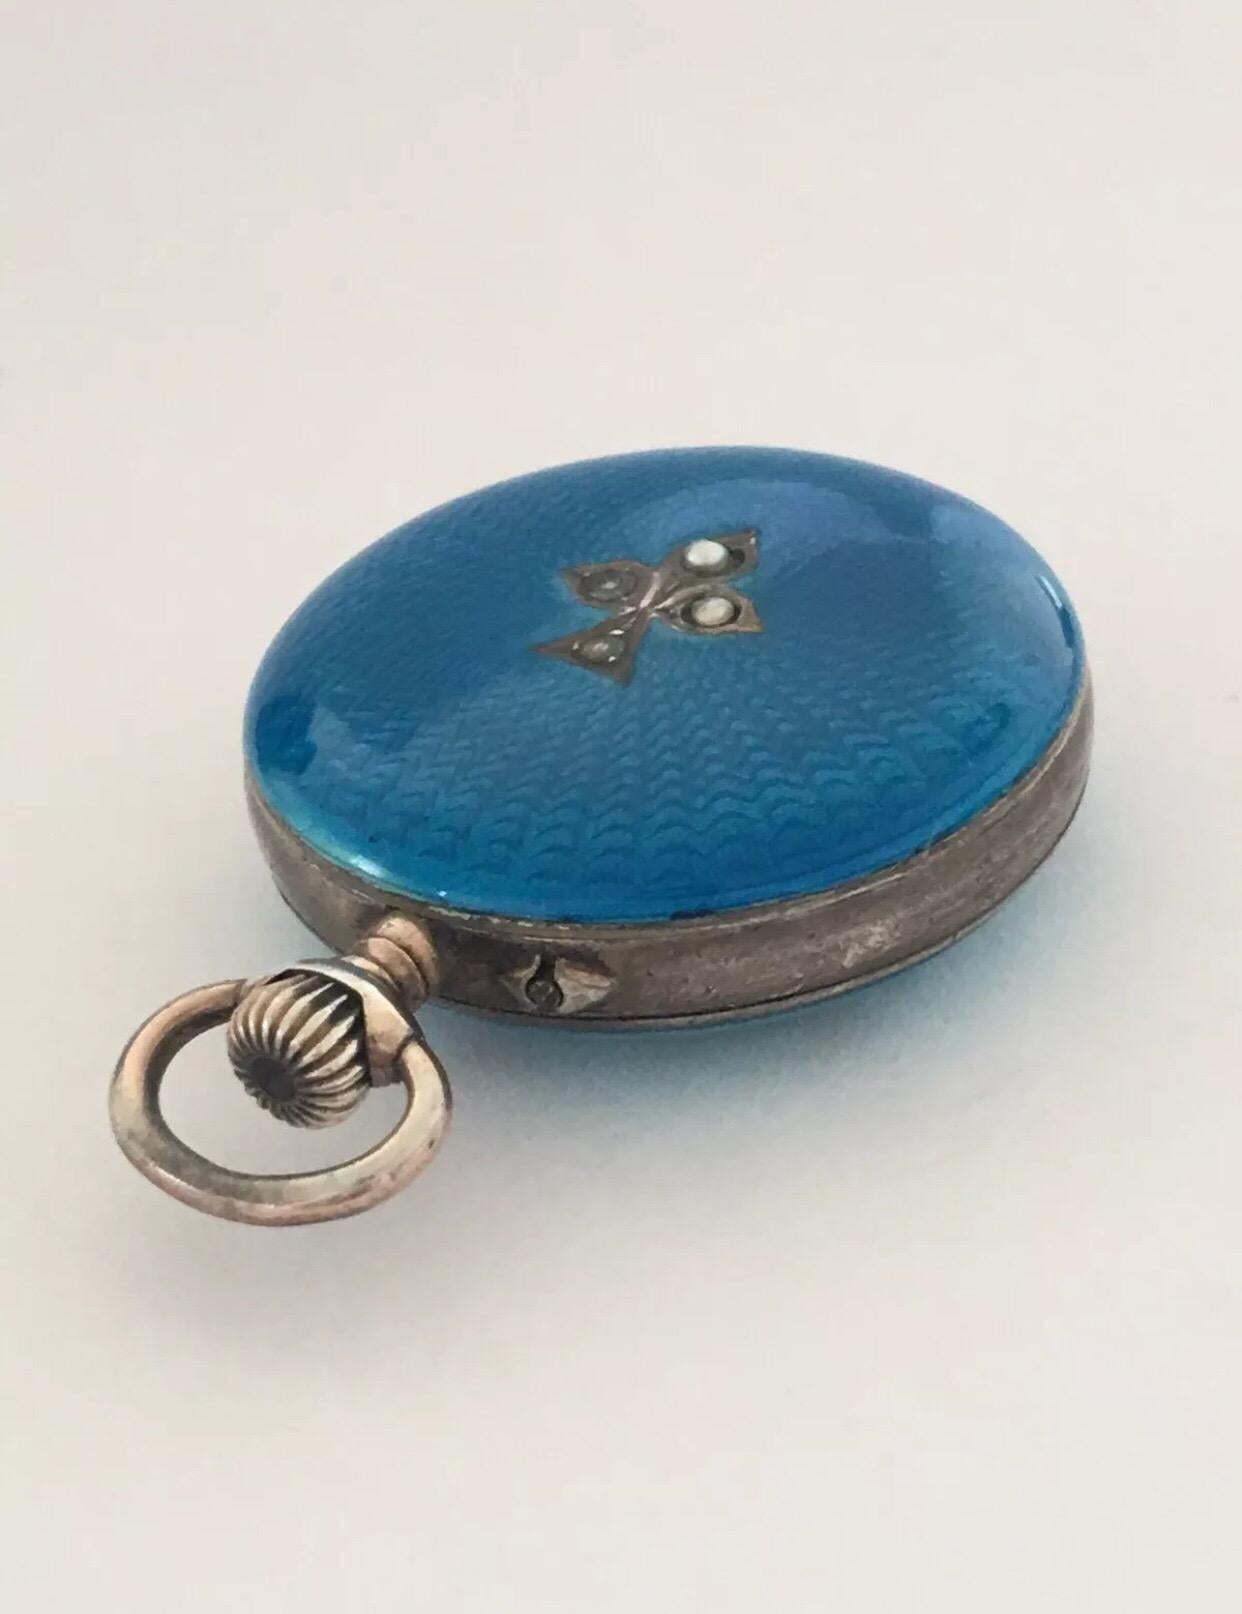 Antique Turquoise or Blue Enamel Silver Fob Watch 3